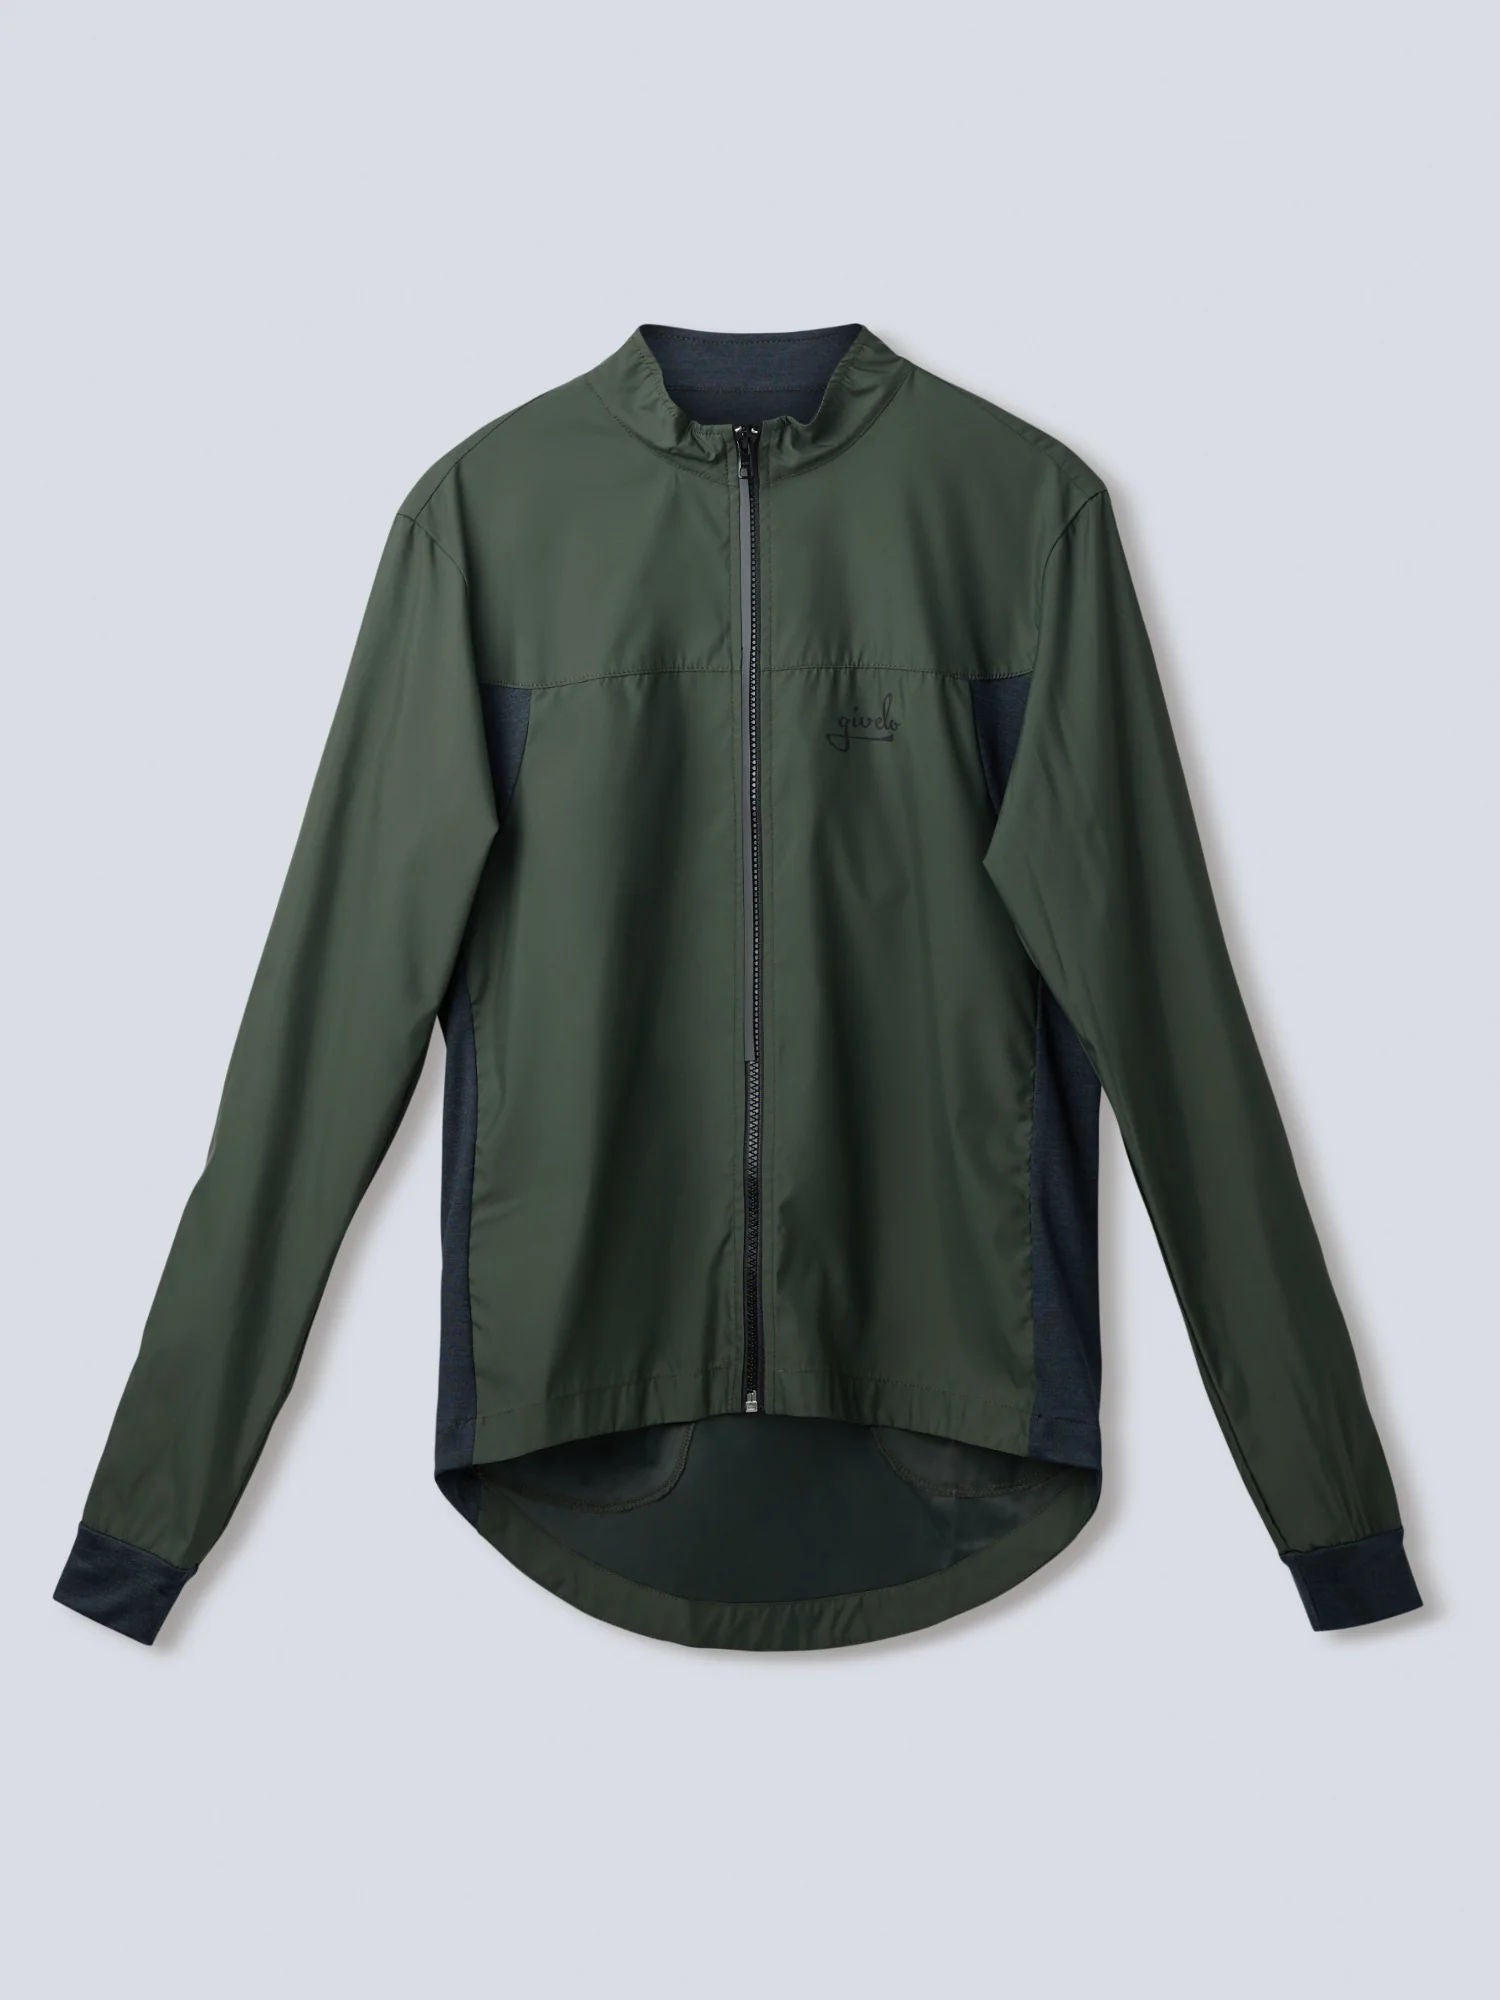 Givelo Military Green Quick Free サイクル ウィンドジャケット | GEARED